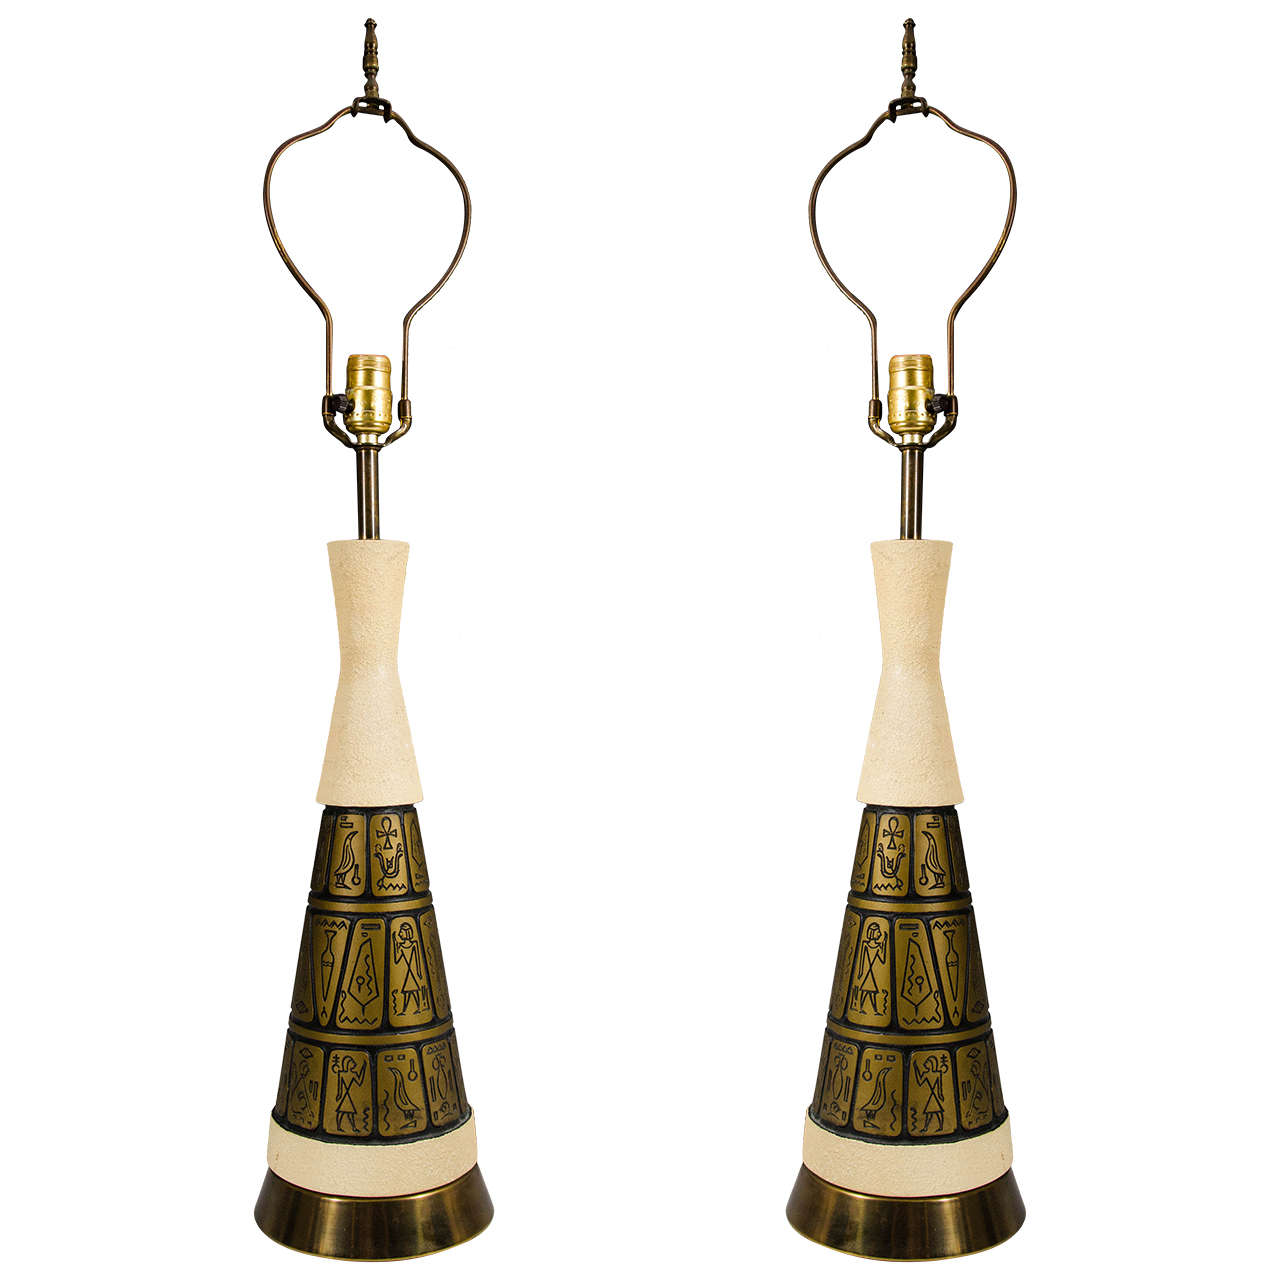 Midcentury Pair of Egyptian Inspired Table Lamps Marked F.A.I.P